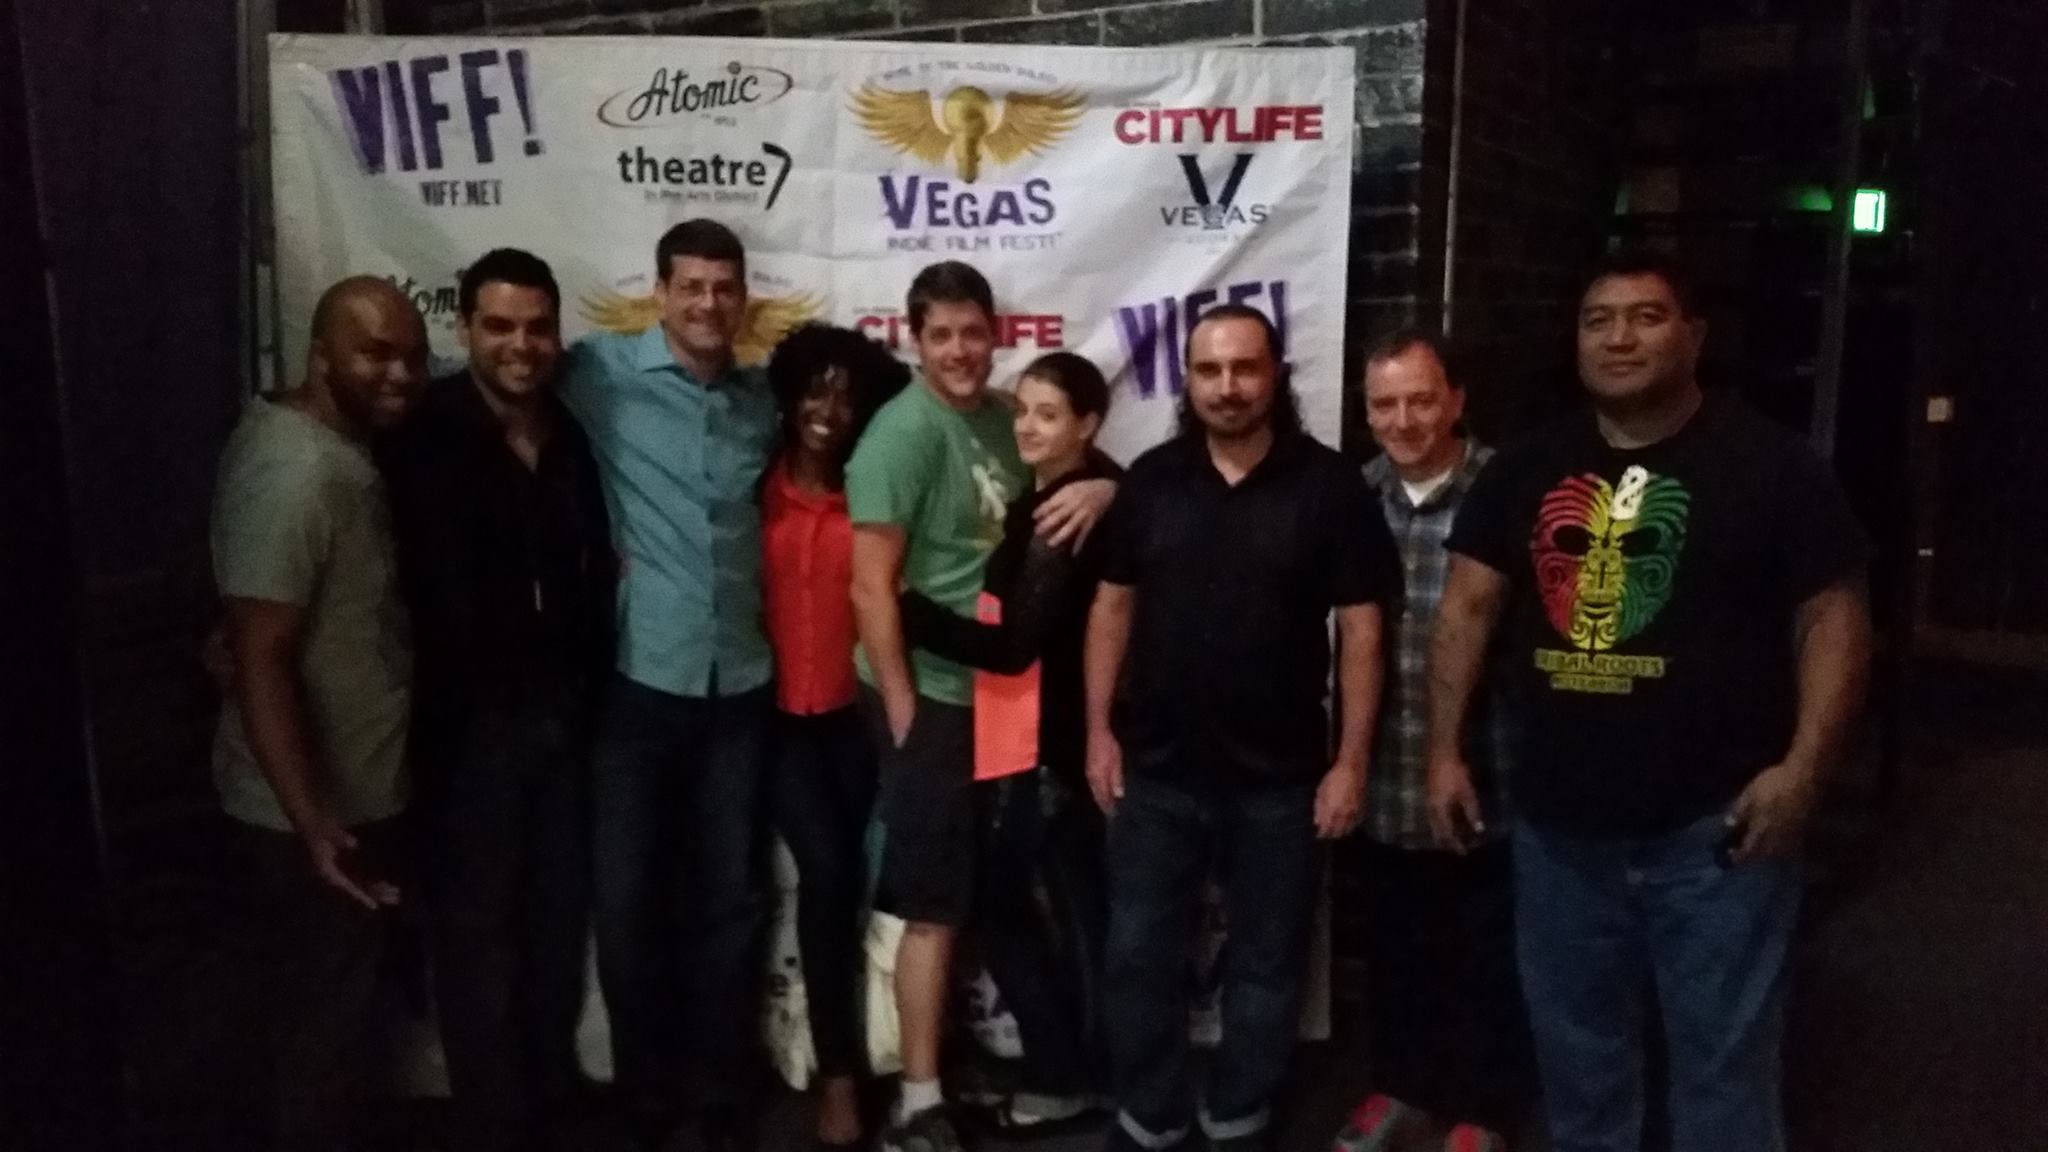 Jason Anthony Fisher with Cast and Crew members from A.K.A. The Surgeon at Vegas Indie Film Festival.